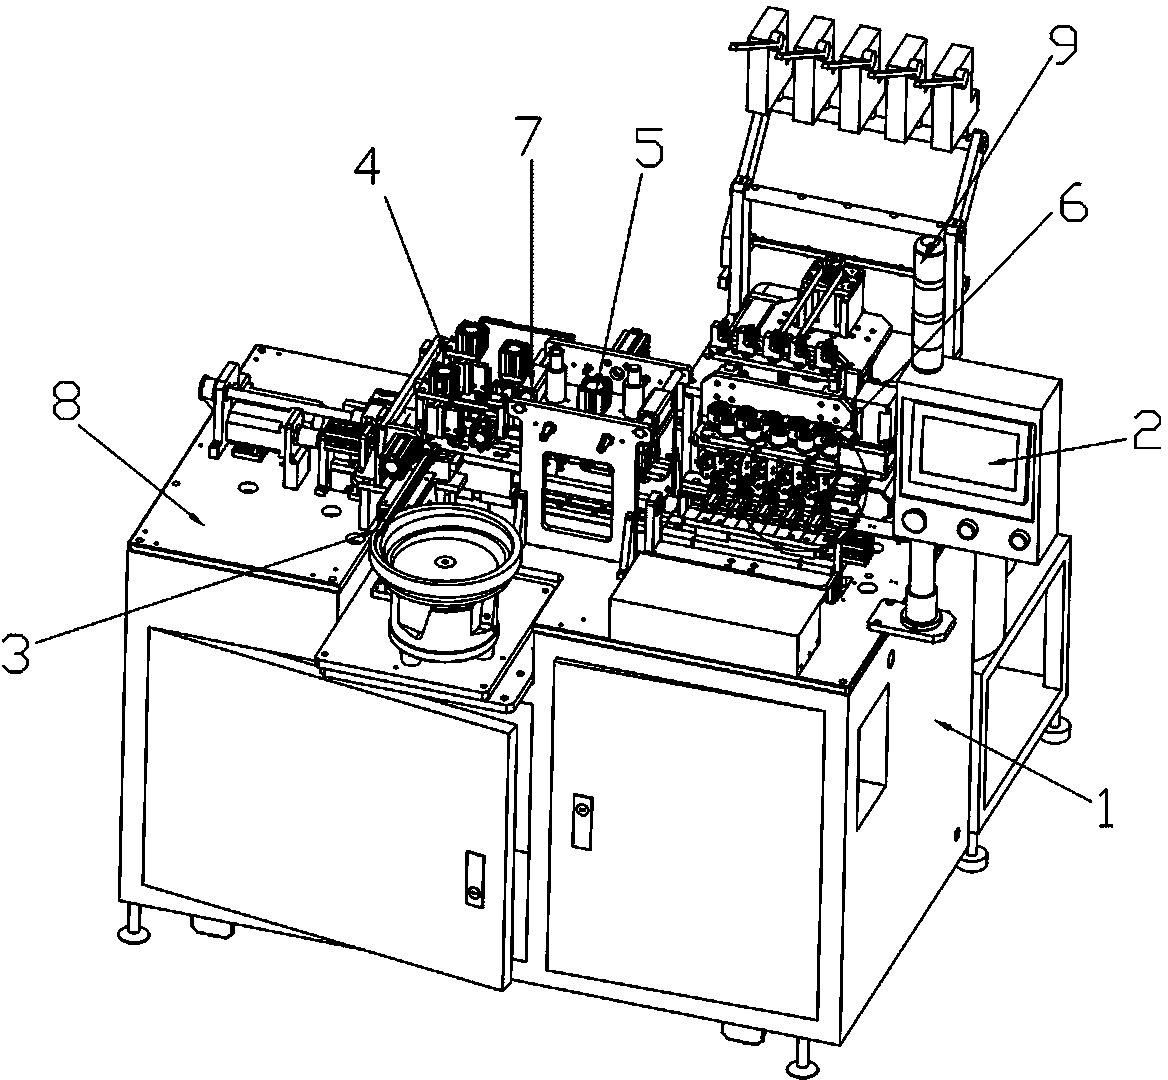 Full-automatic inductance winding machine and winding method thereof